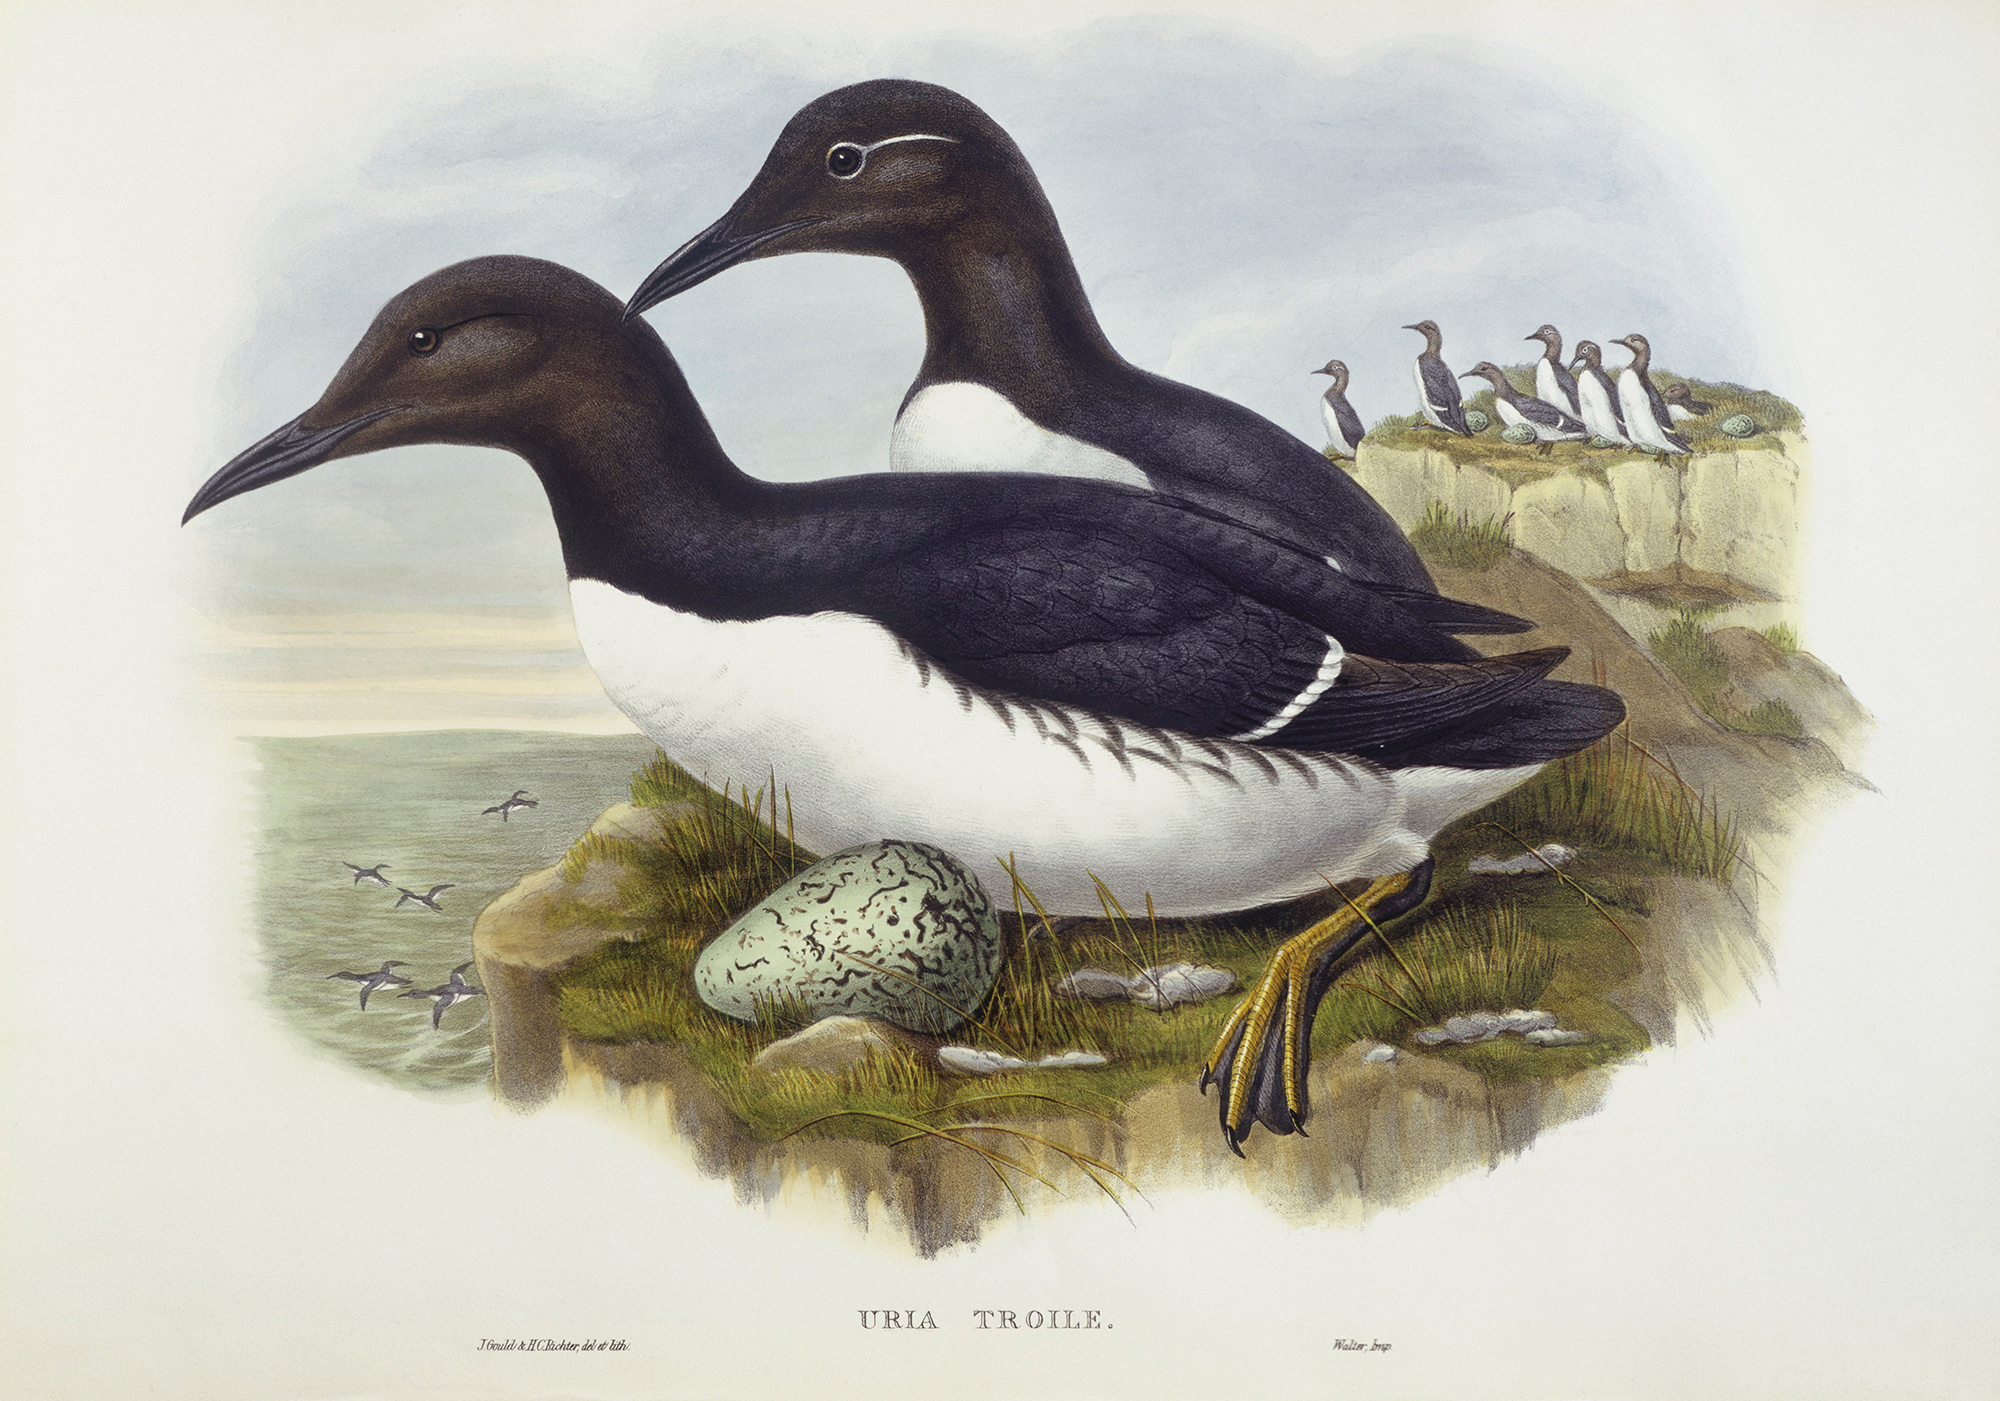 The common murre (Uria aalge), which was a source of eggs for San Francisco's egg rush. Engraving by John Gould, William Hart, H. C. Richter.